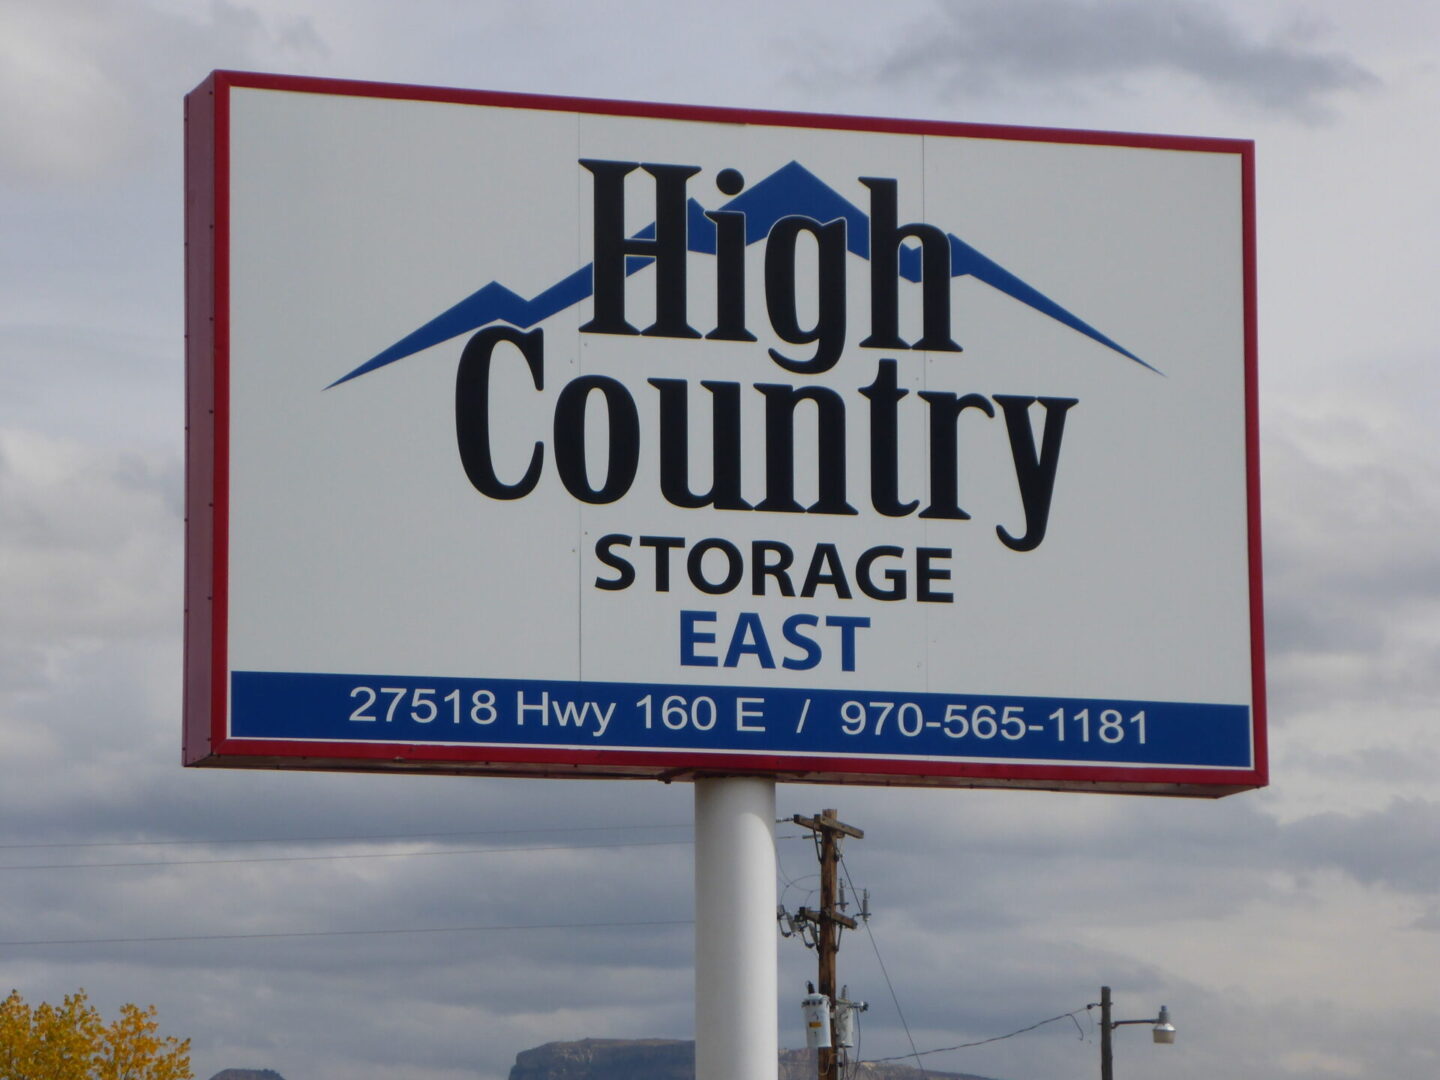 Location East Sign